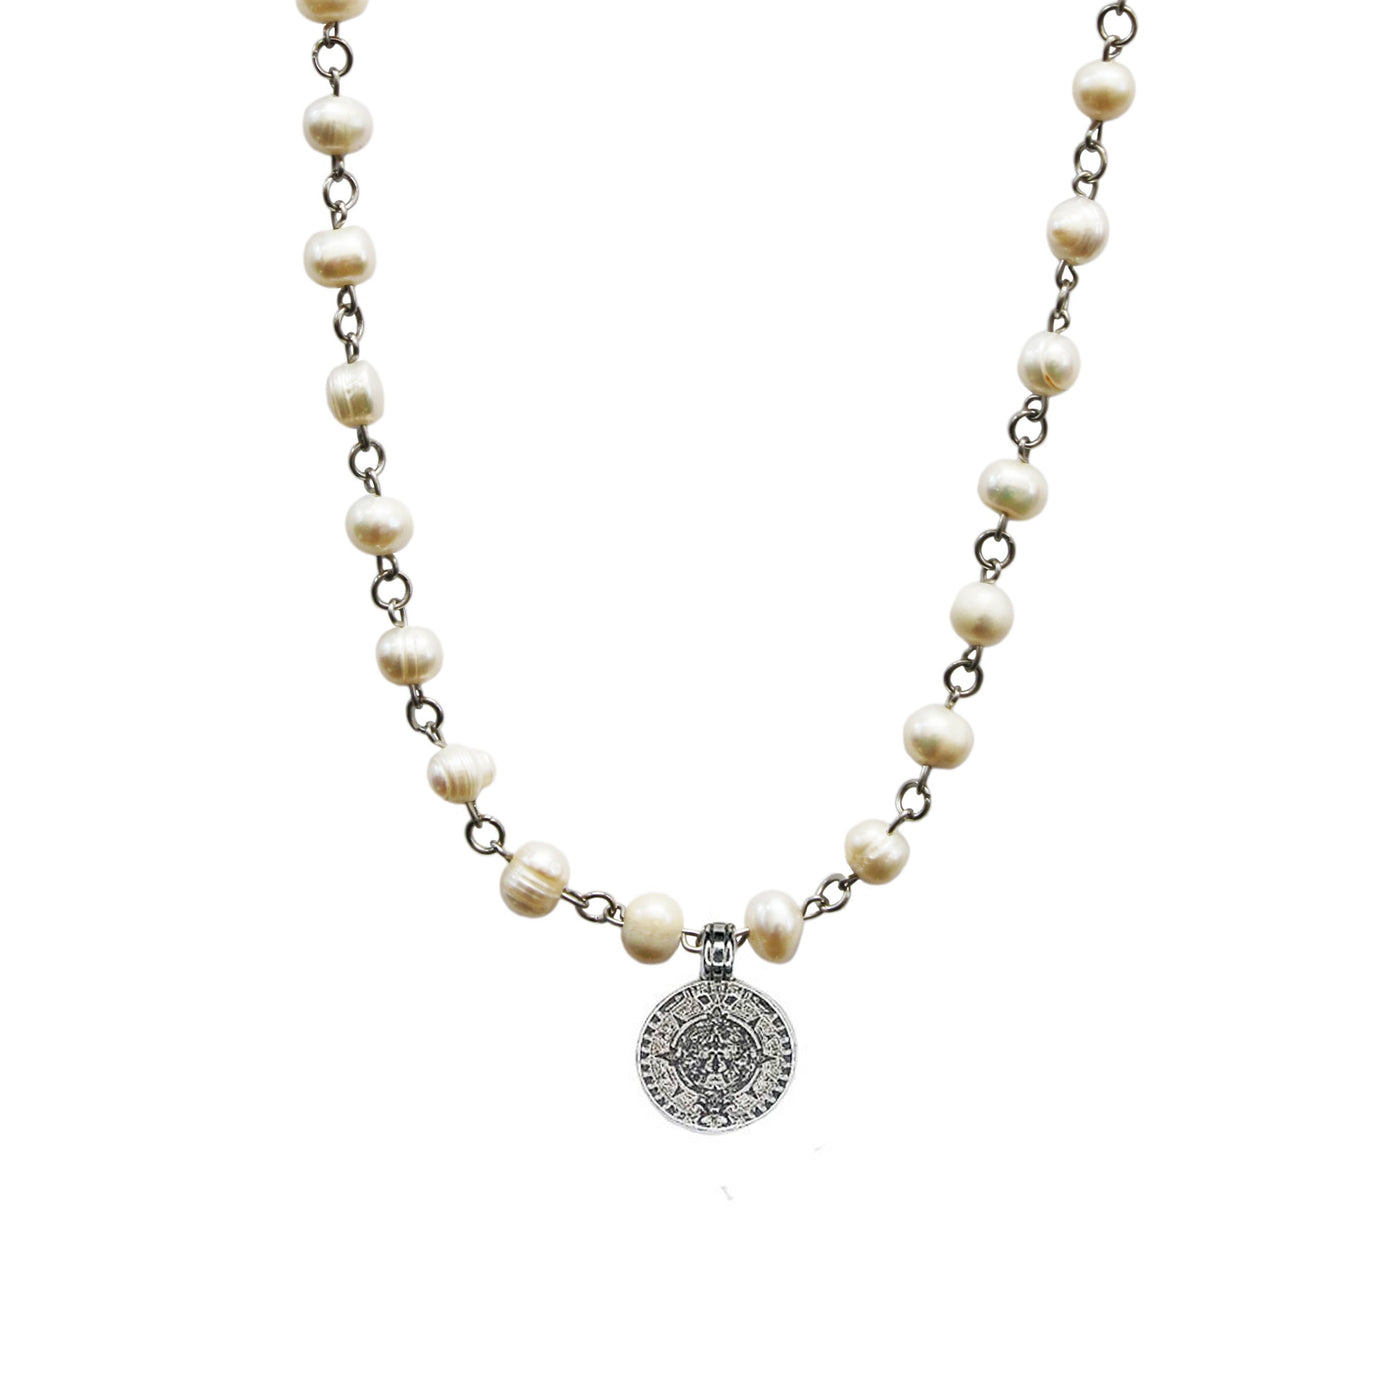 50% OFF Pearl Coin Necklace!